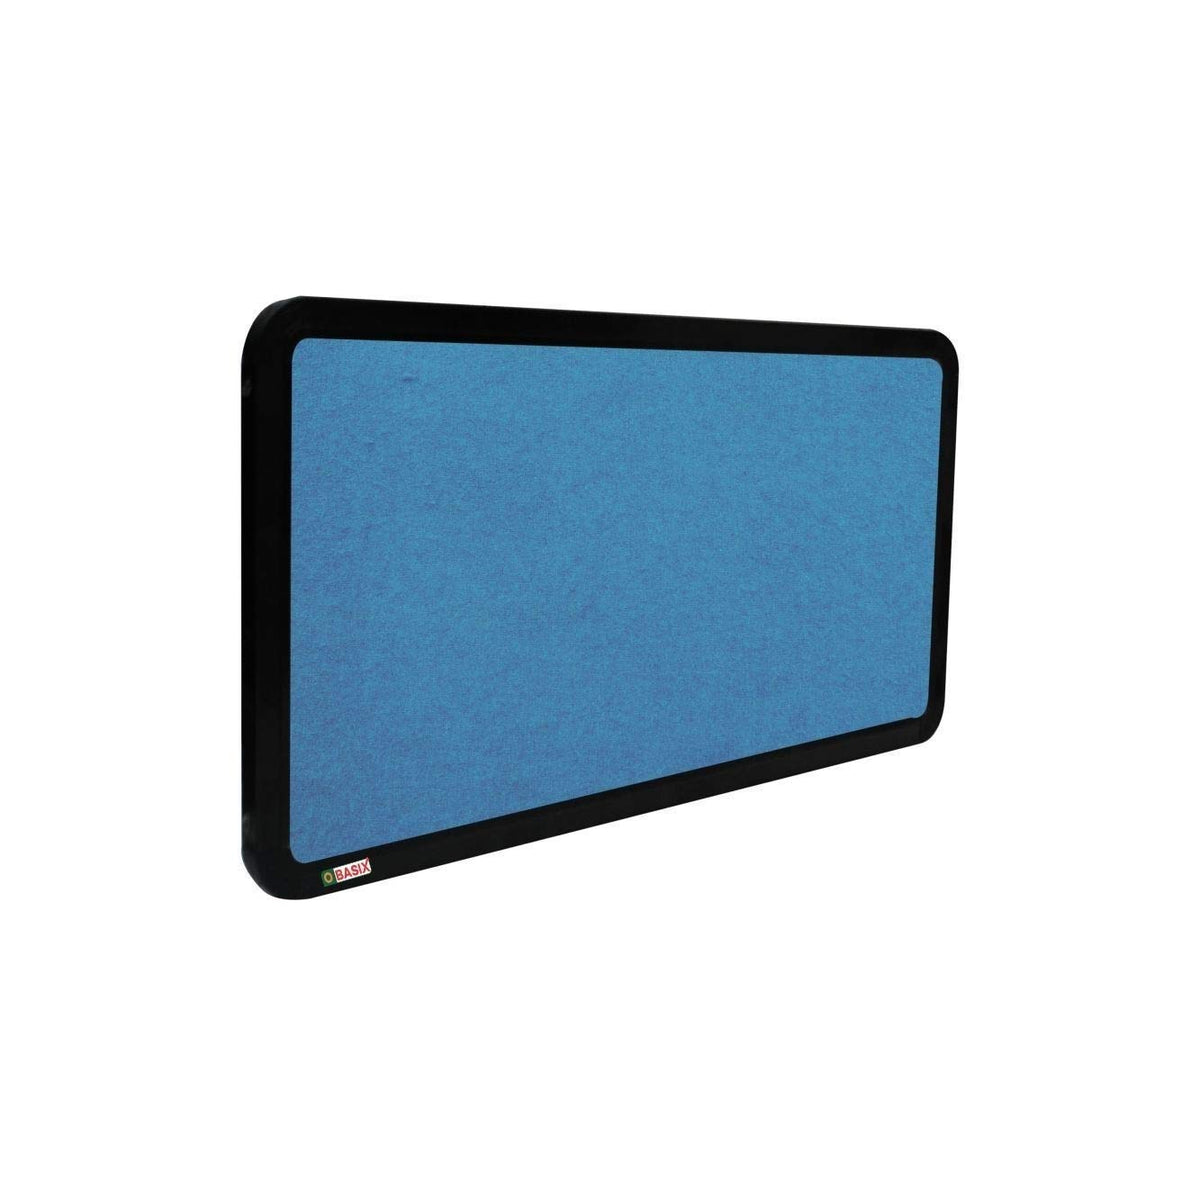 OBASIX® Superior Series Pin-up Bulletin Notice Board (1x2) Feet Turquoise Blue for School College Offices  | Powder Coated Black Frame SPBPCBTB3060